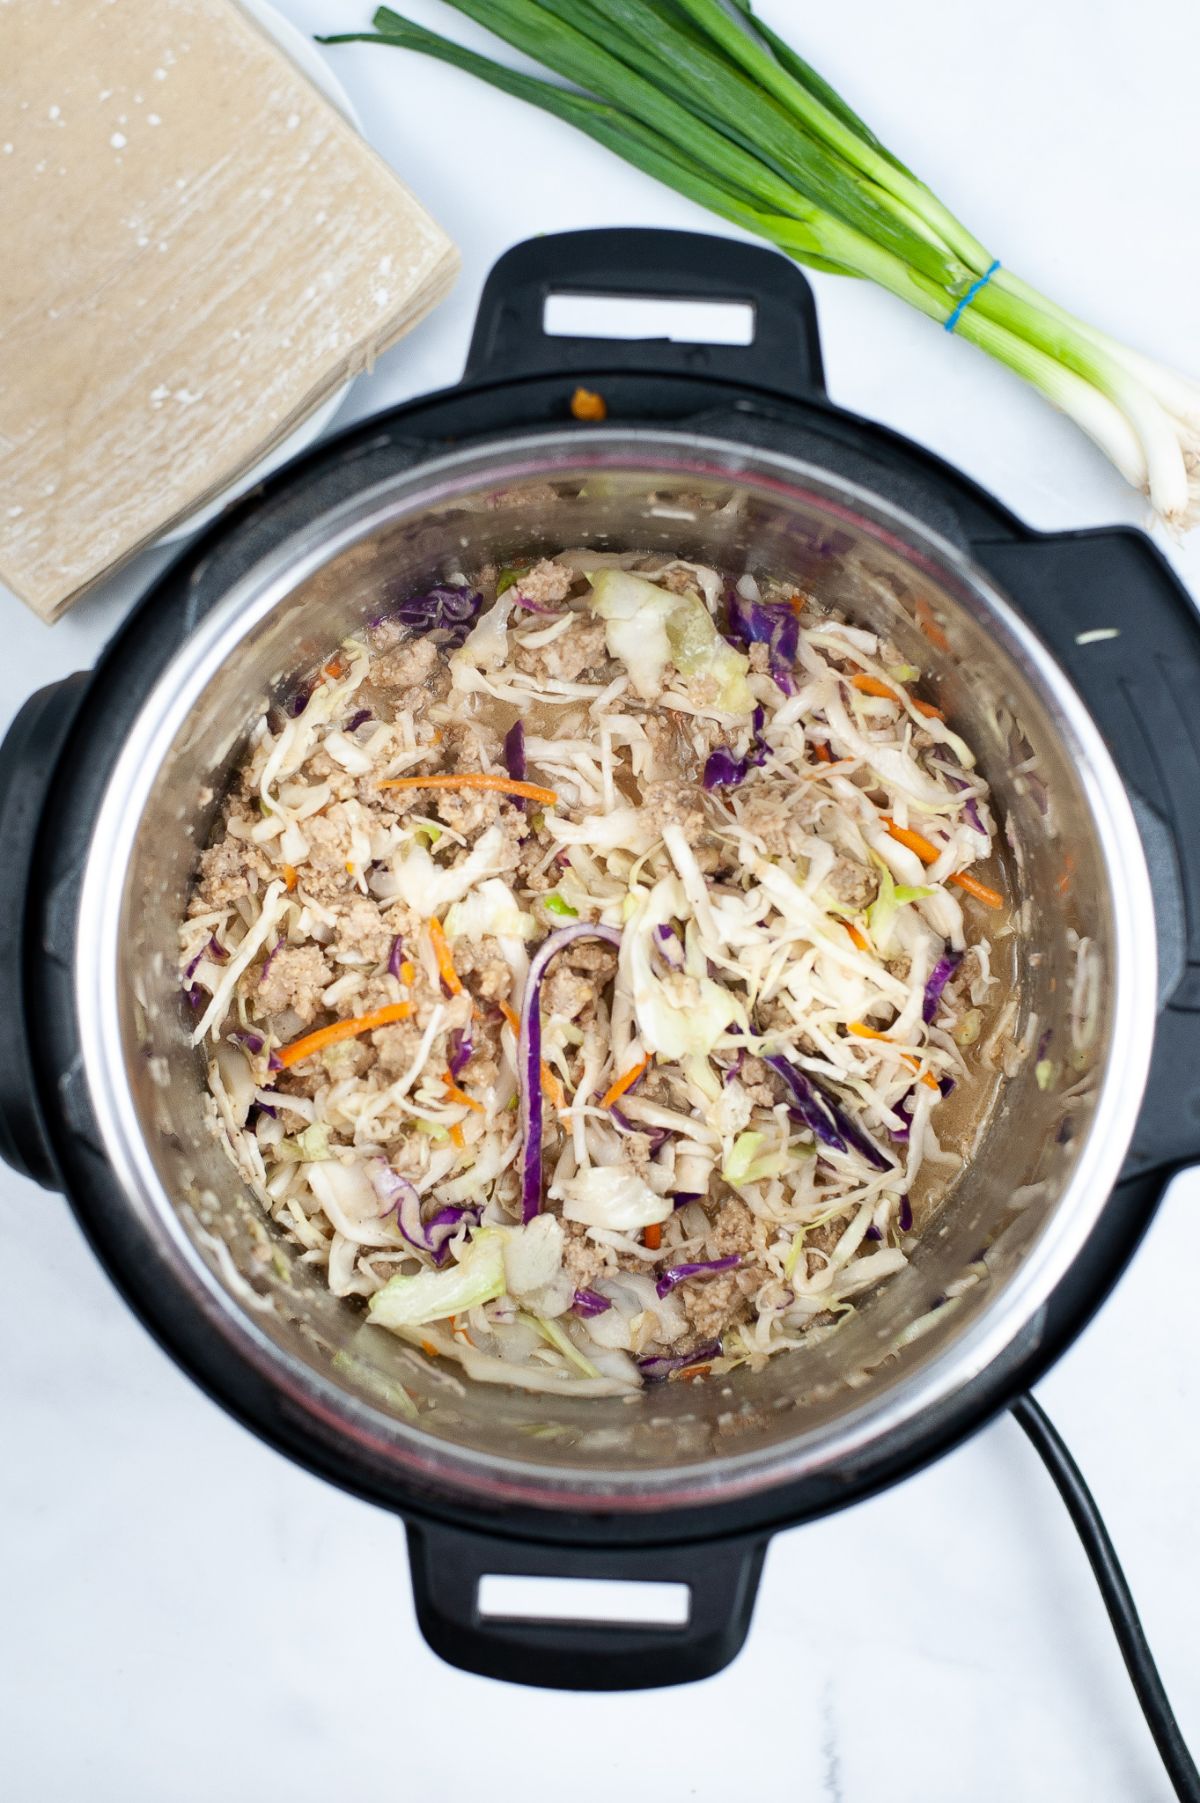 Seasoned ground chicken topped with coleslaw being cooked in Instant Pot.